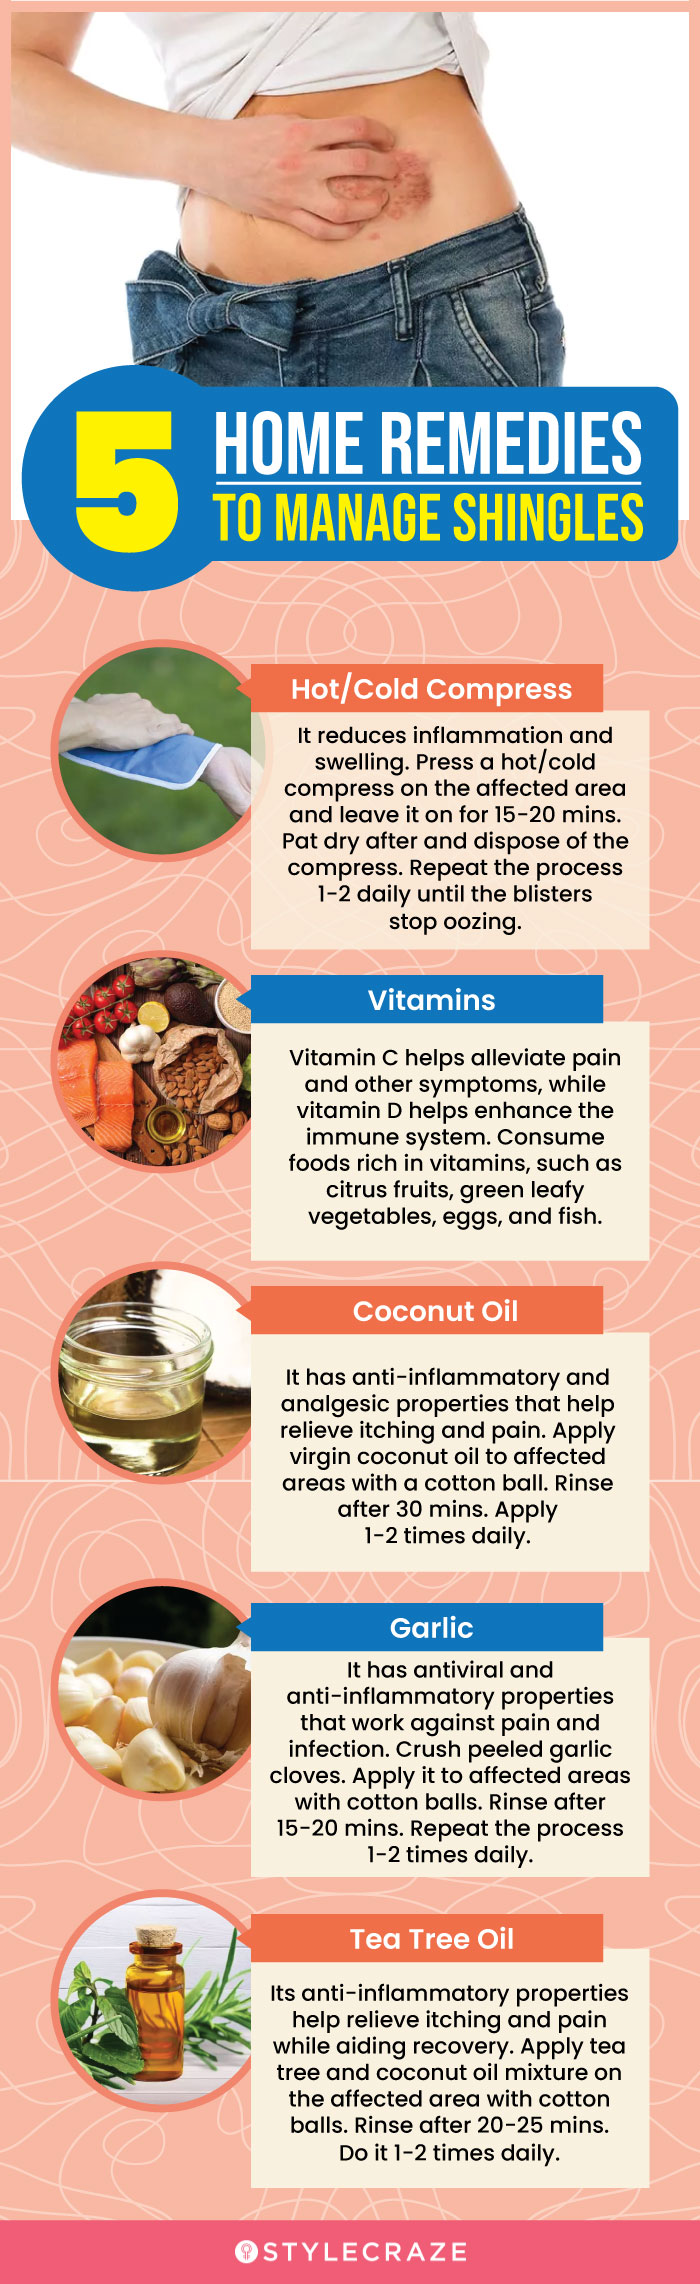 5 home remedies to manage shingles (infographic)